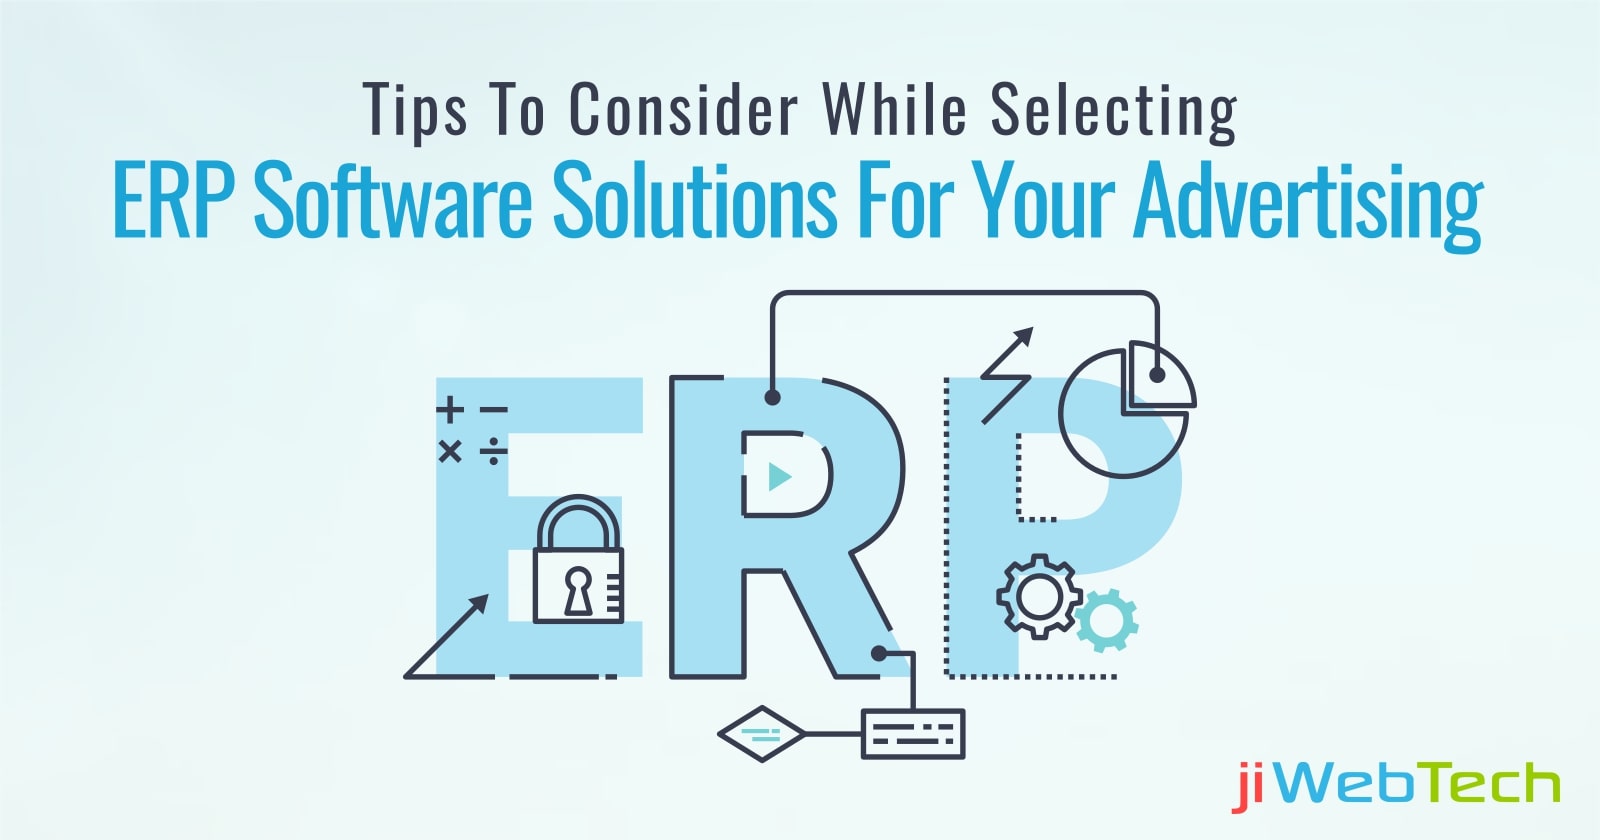 Tips To Consider While Selecting ERP Software Solutions For Your Advertising